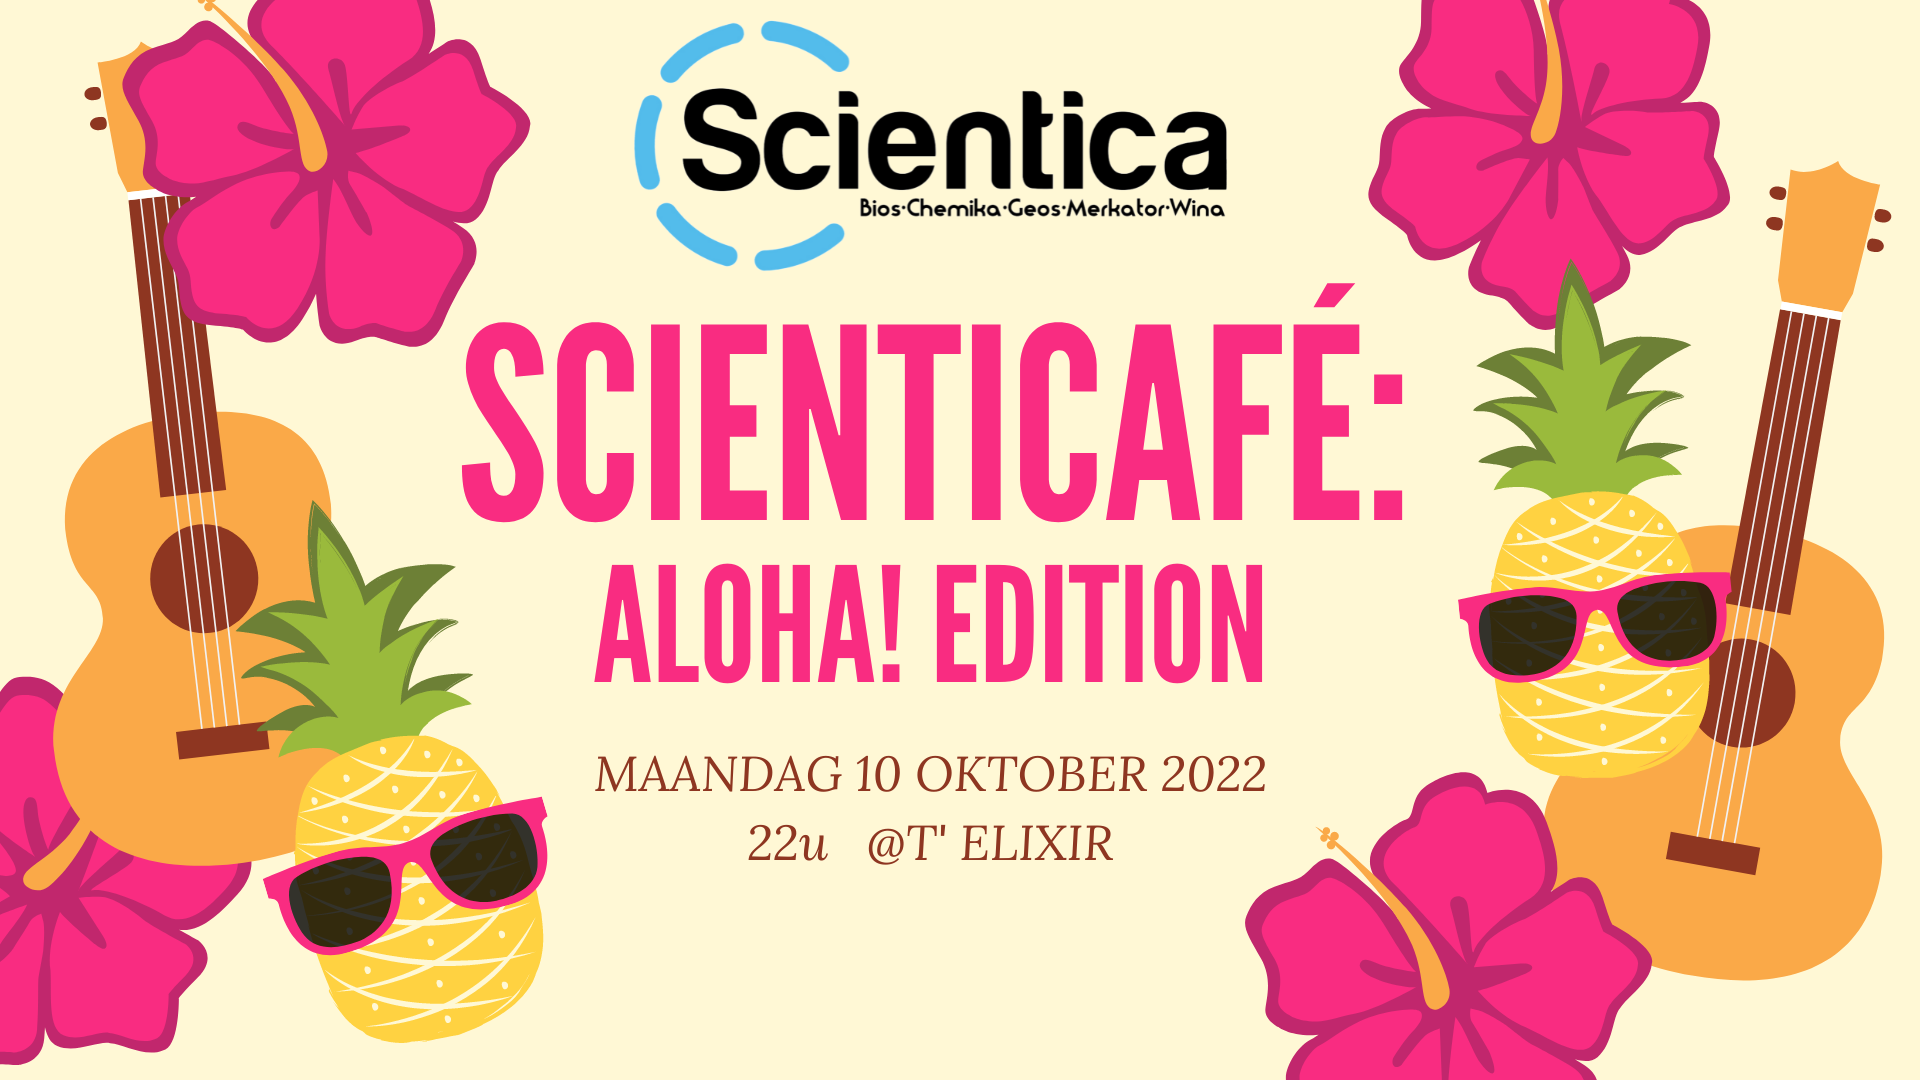 scienticafeAloha.png